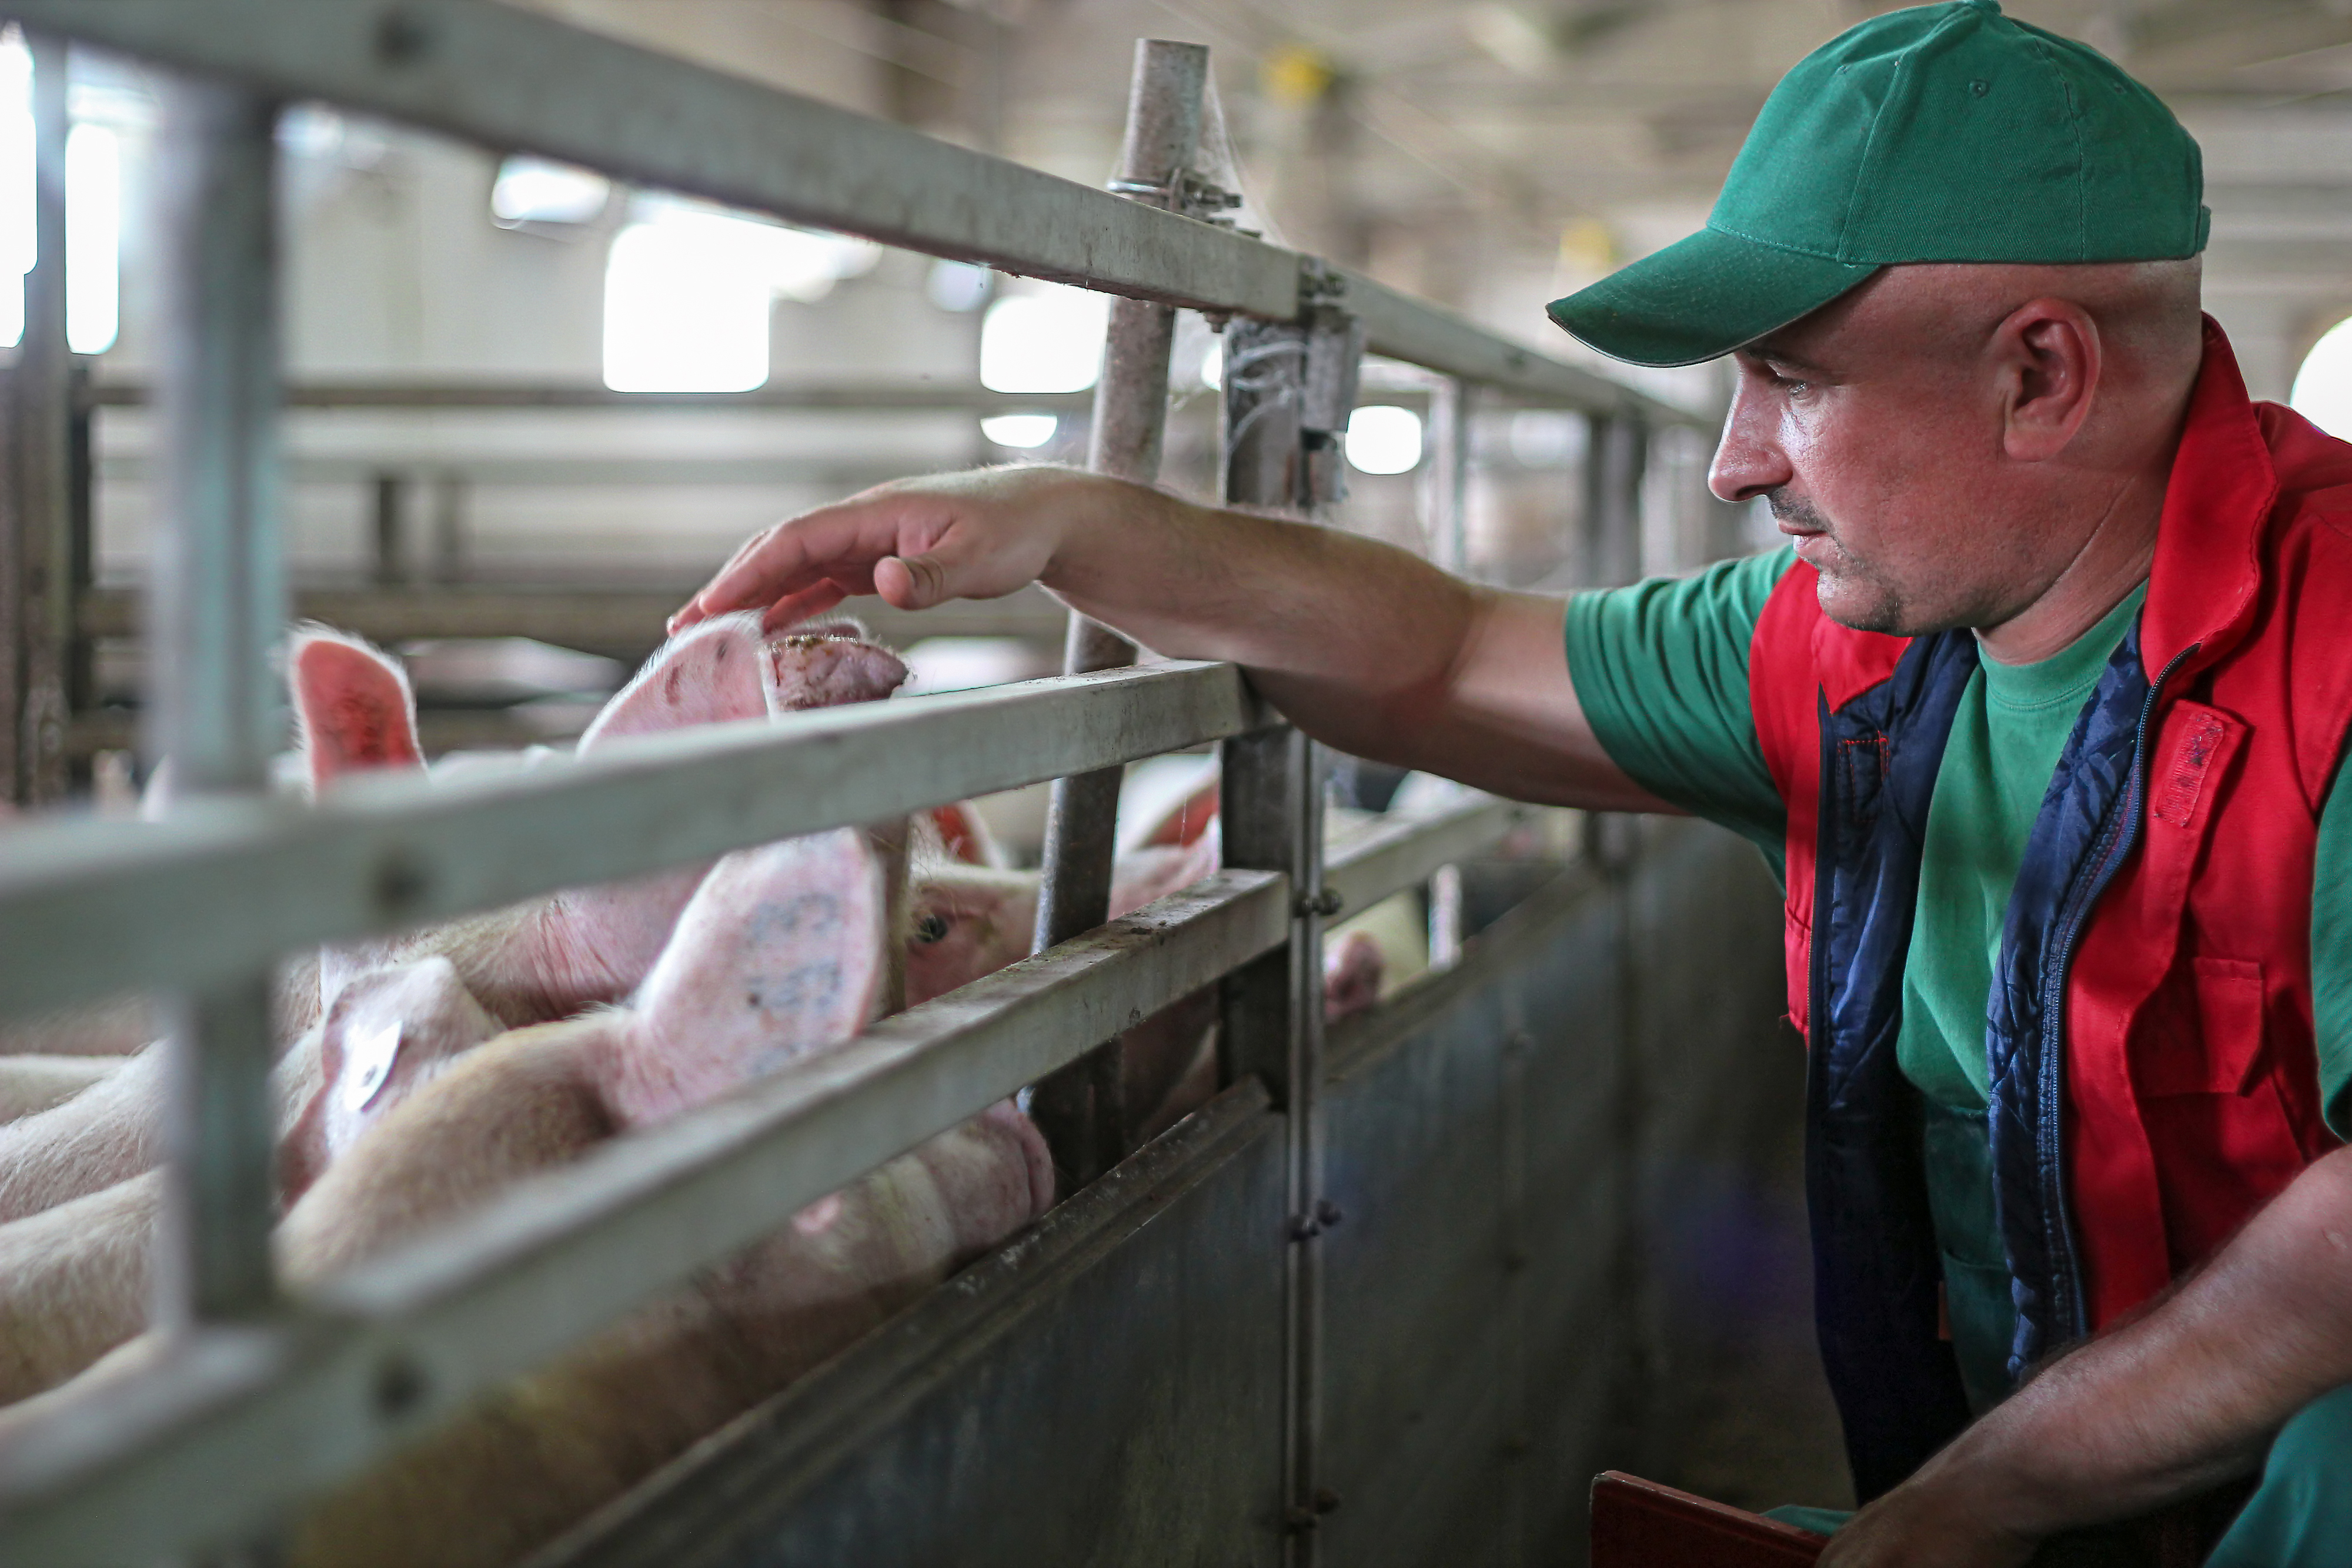 USDA to Send Trade Relief to JBS, Brazil’s Largest Meatpacker – Farmers Union Says Funds Should be Targeted to American Farmers and Ranchers